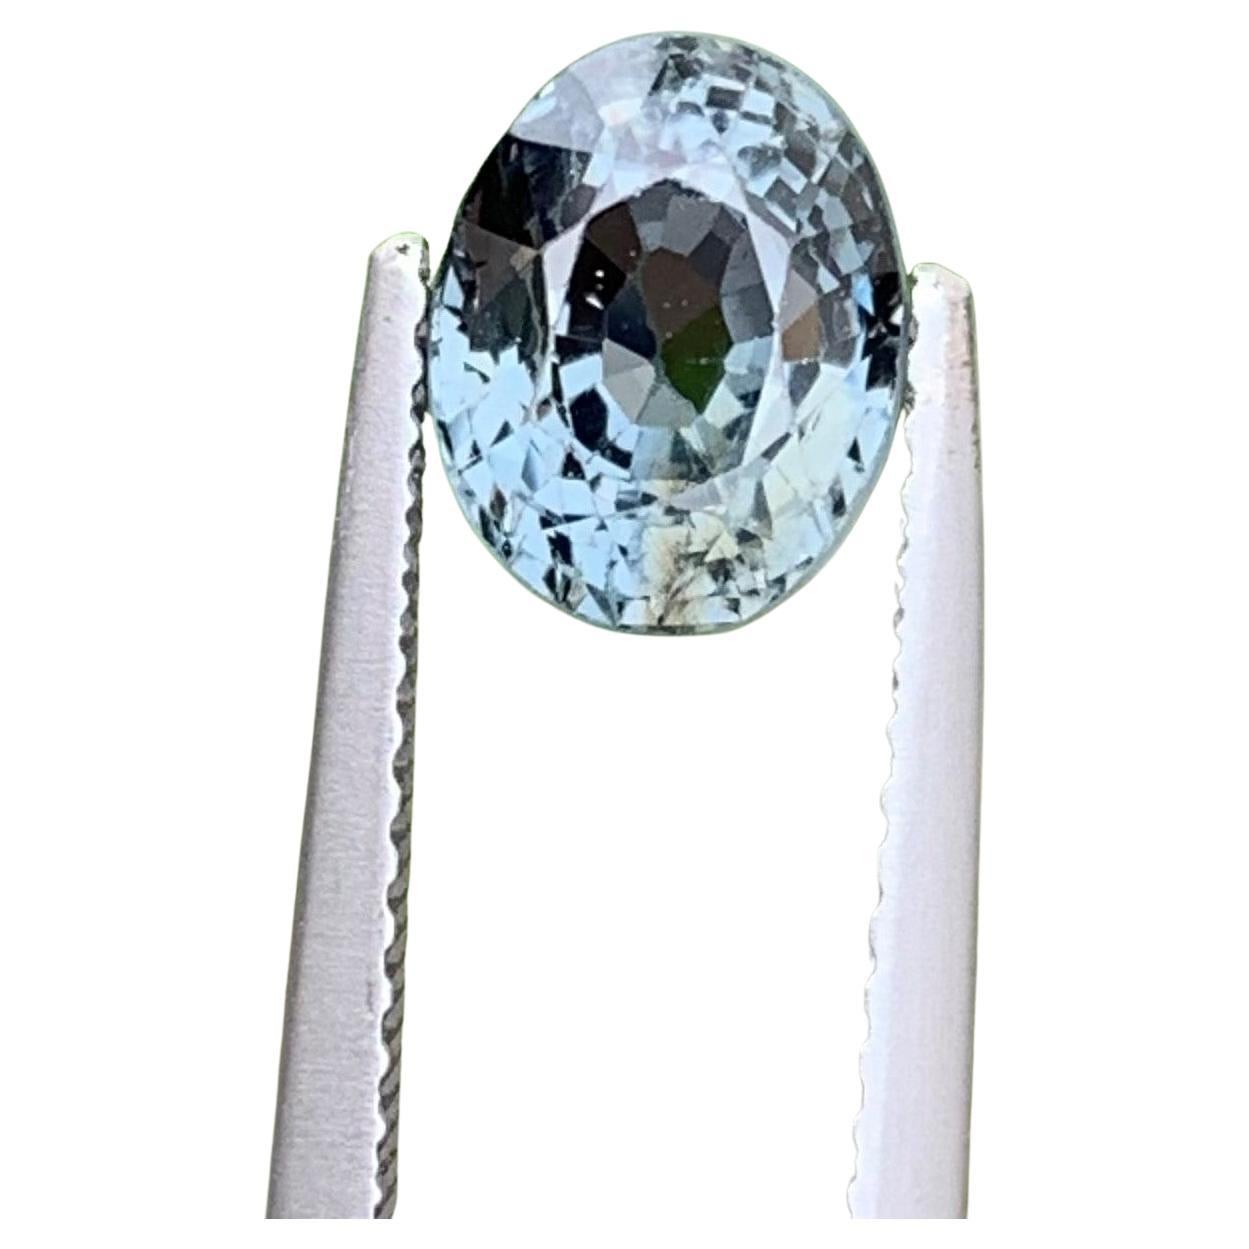 Gorgeous 2.15 Carat Natural Loose Gray Spinel Oval Mixed Cut from Burma Mine